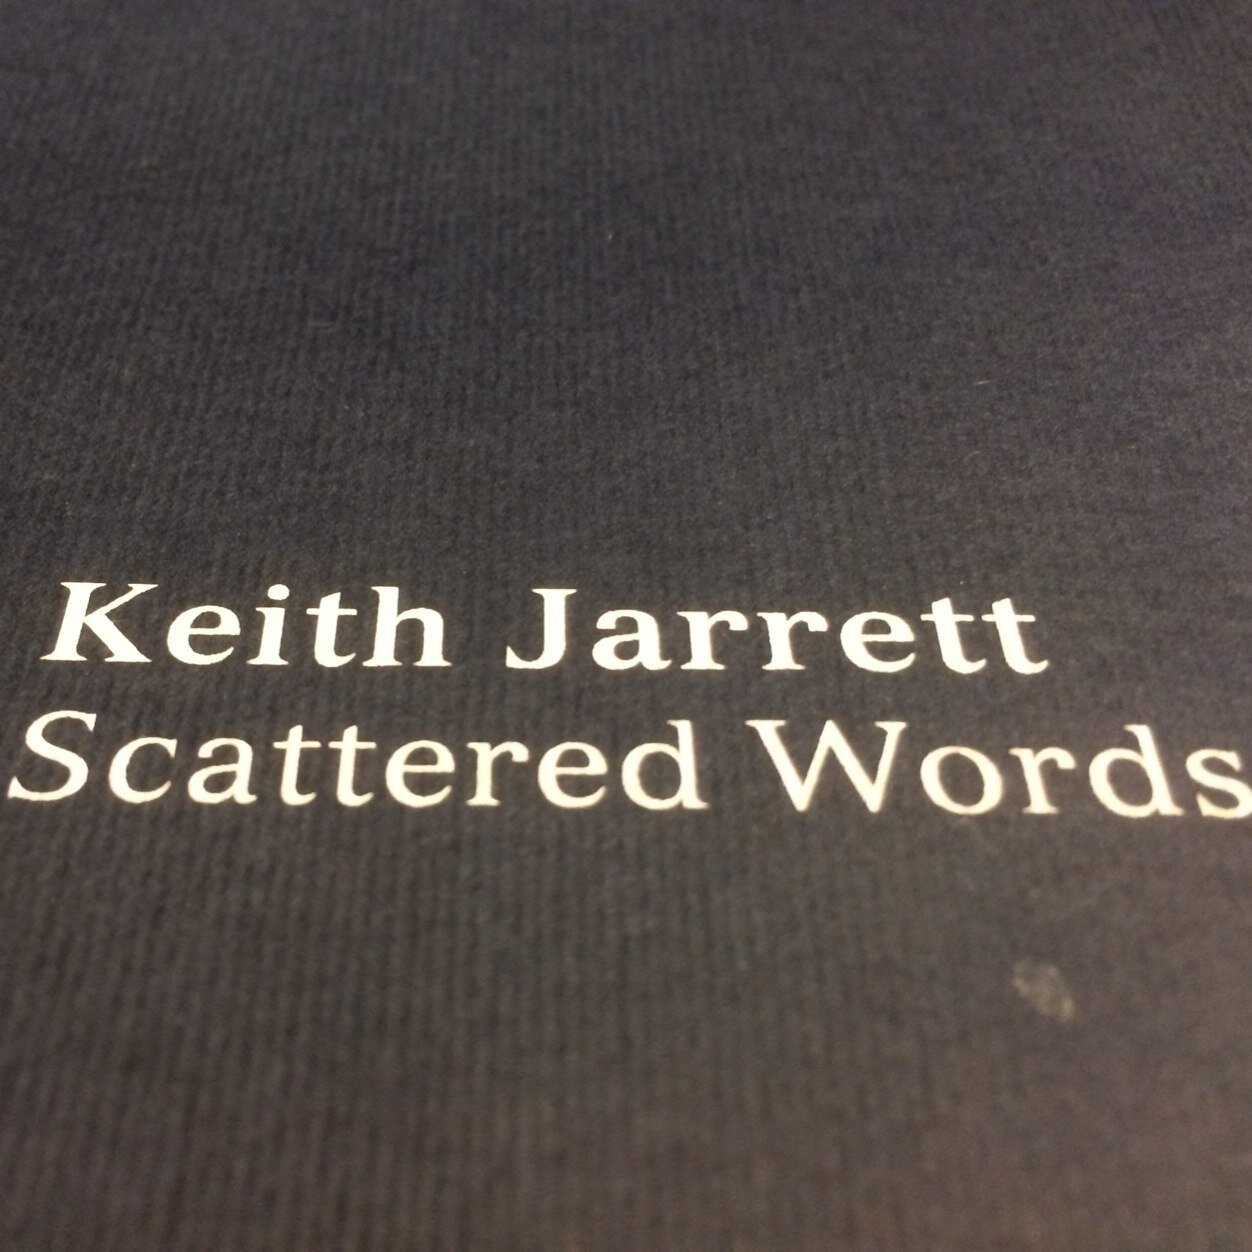 Scattered Words of Keith.D.Jarrett born on 8 May 1945